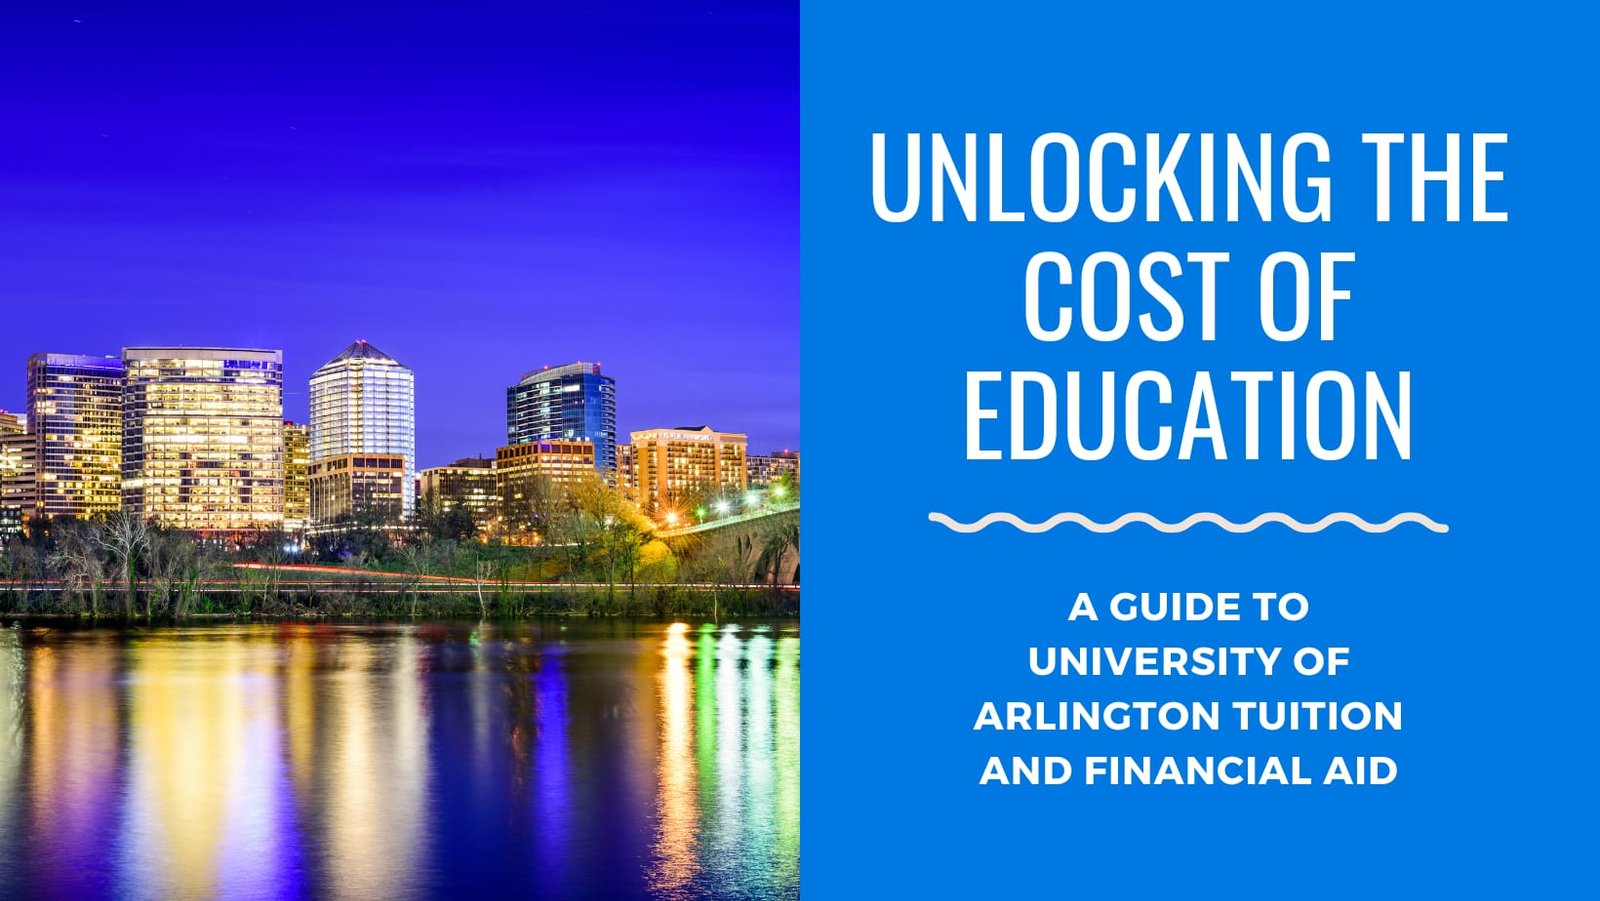 Unlocking the Cost of Education: A Guide to University of Arlington Tuition and Financial Aid